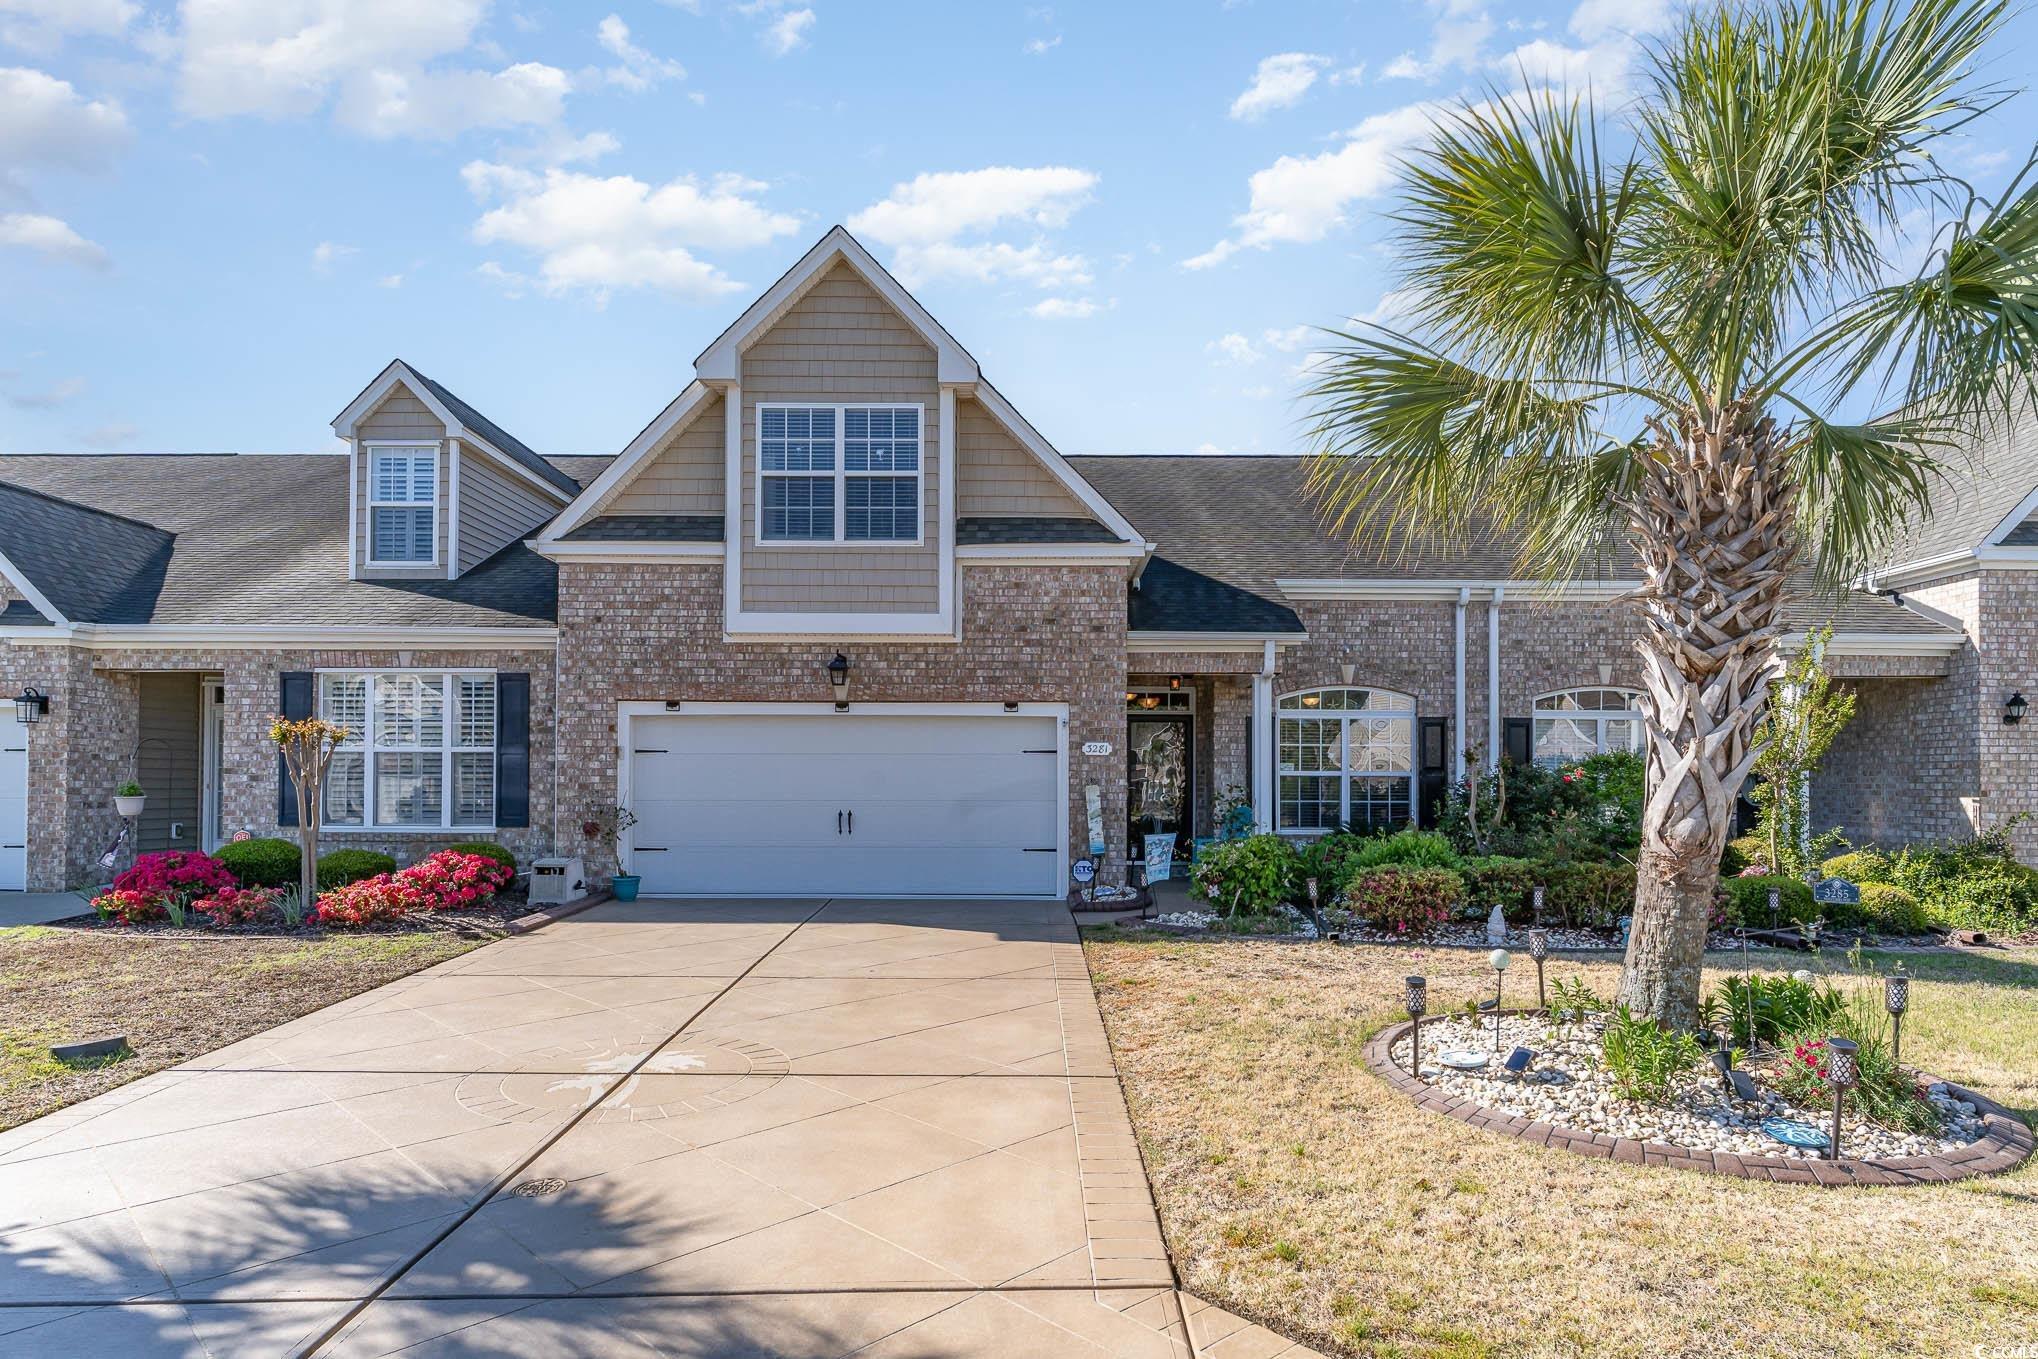 View Myrtle Beach, SC 29579 townhome